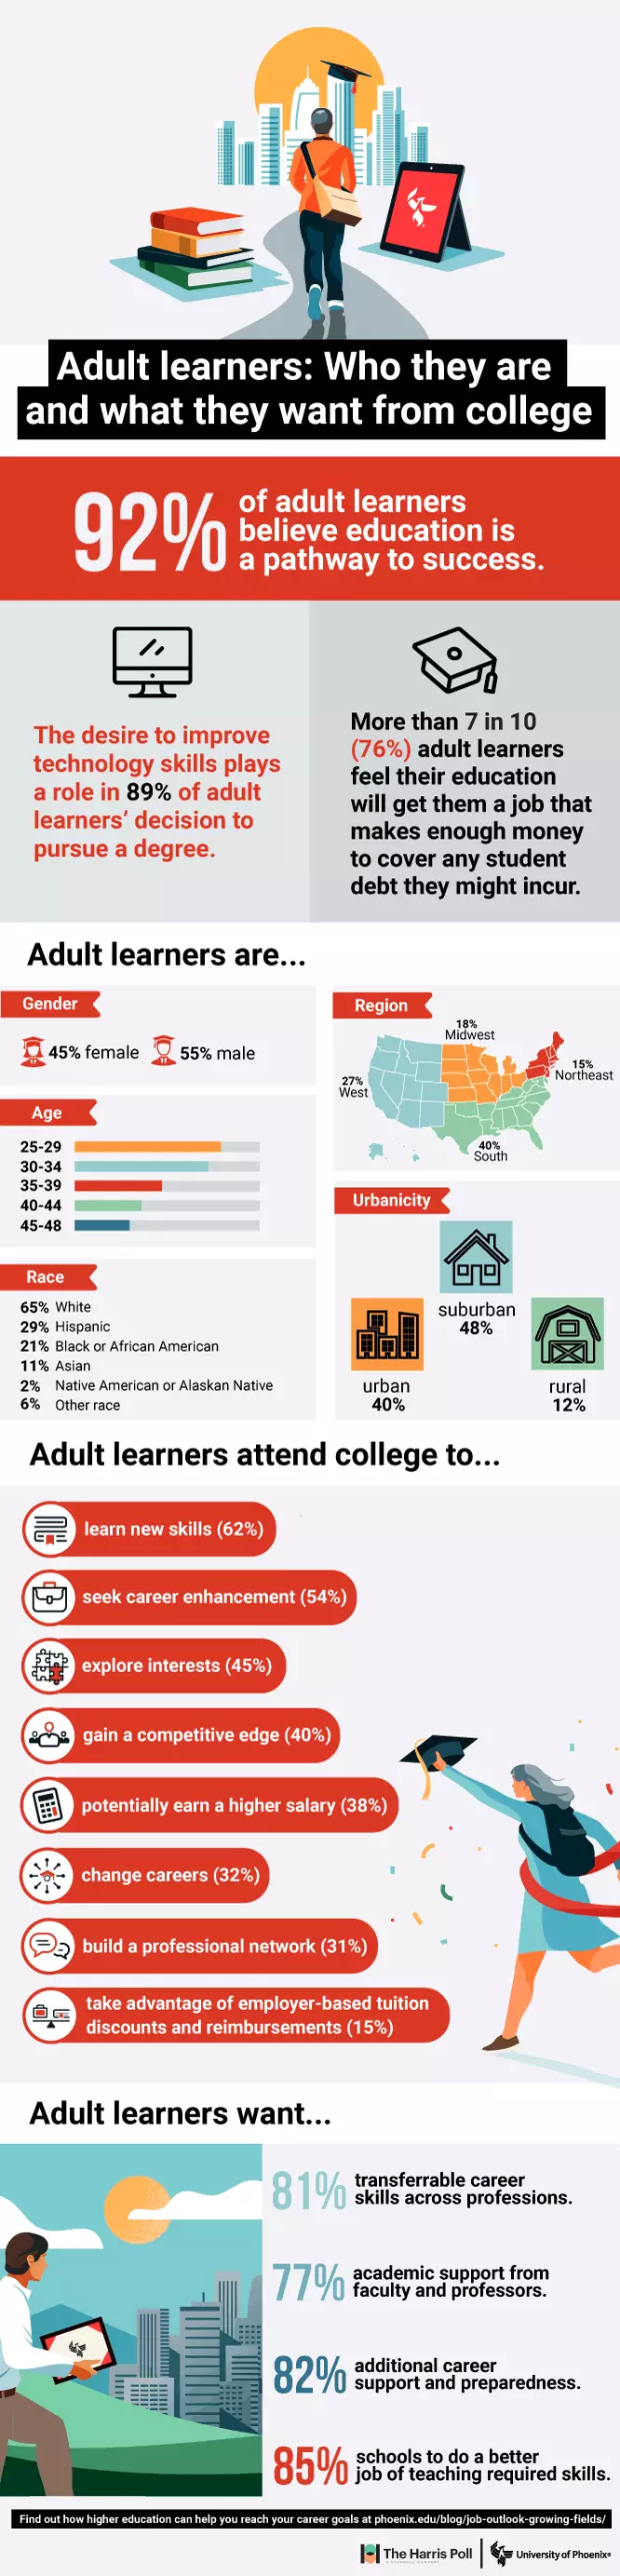 Infographic highlighting Harris Poll data on adult learners.